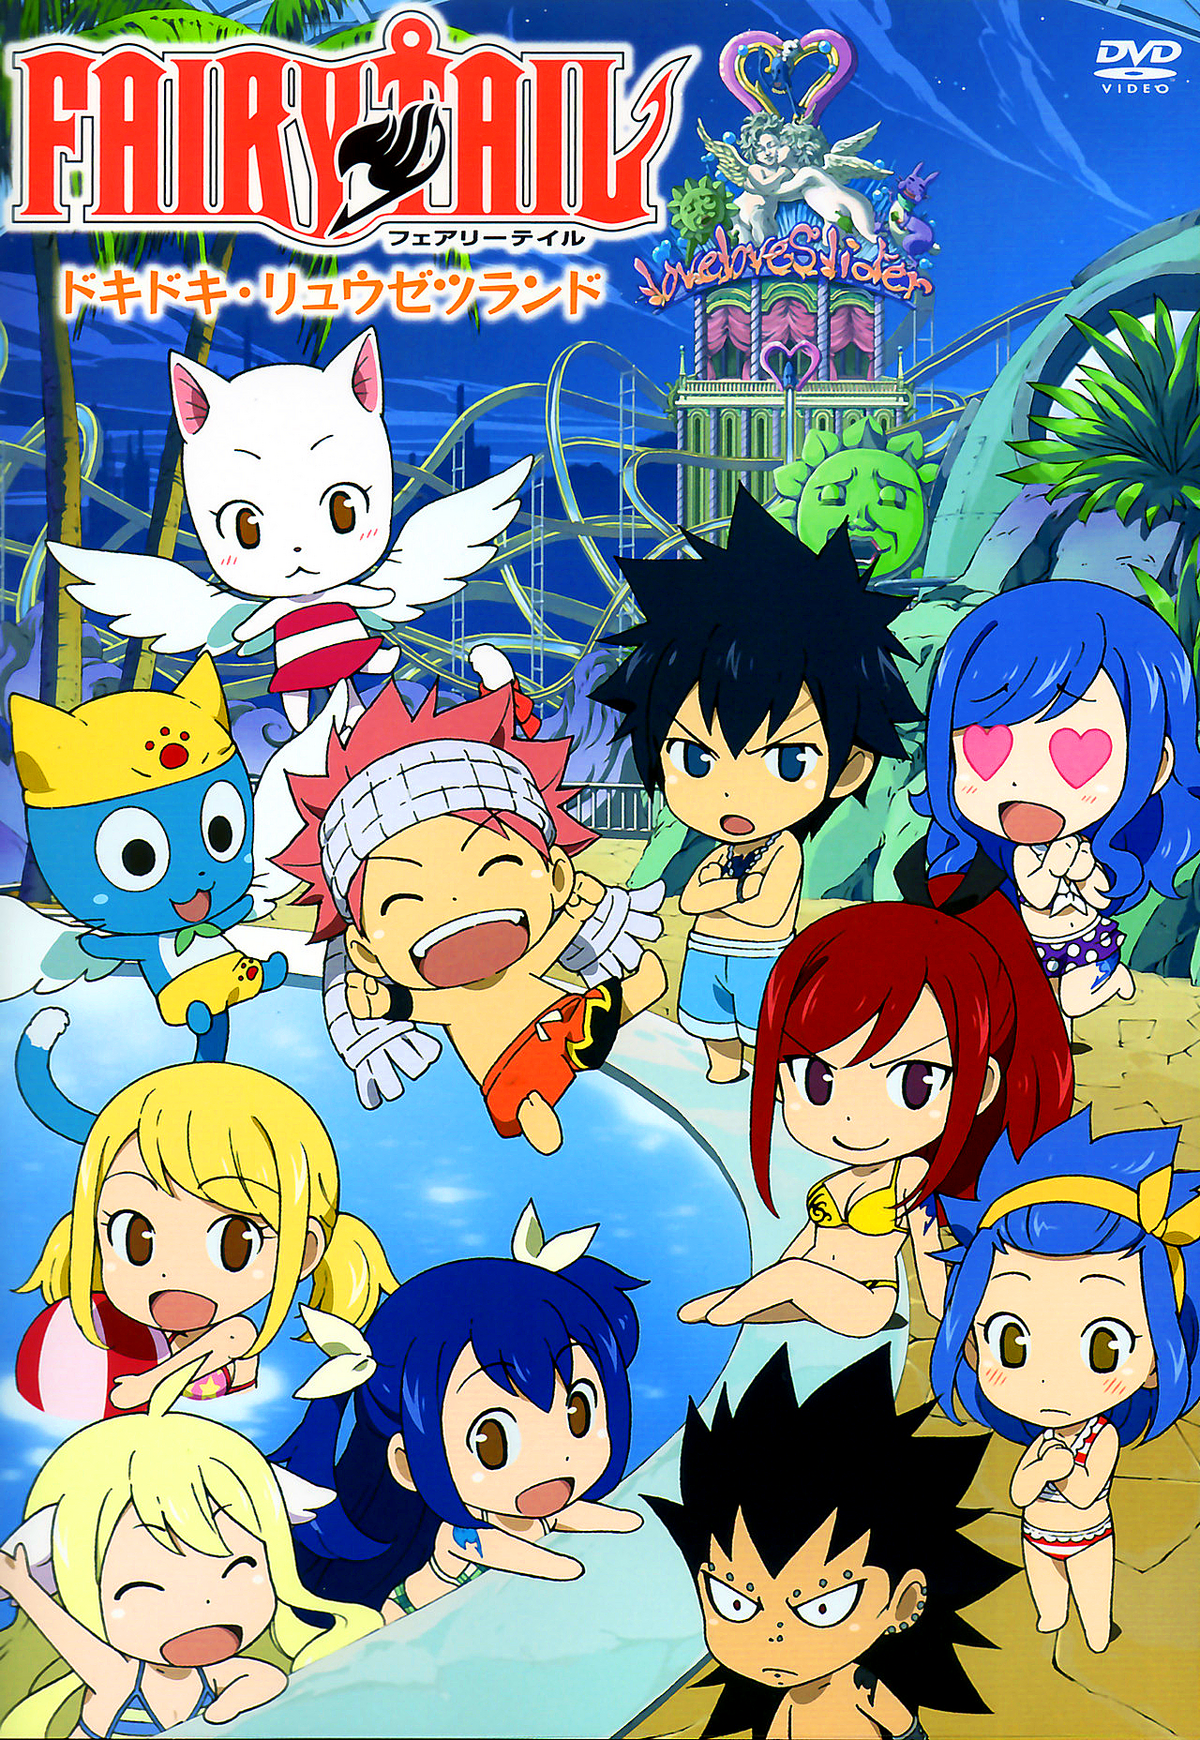 Fairy Tail Season 5: Where To Watch Every Episode